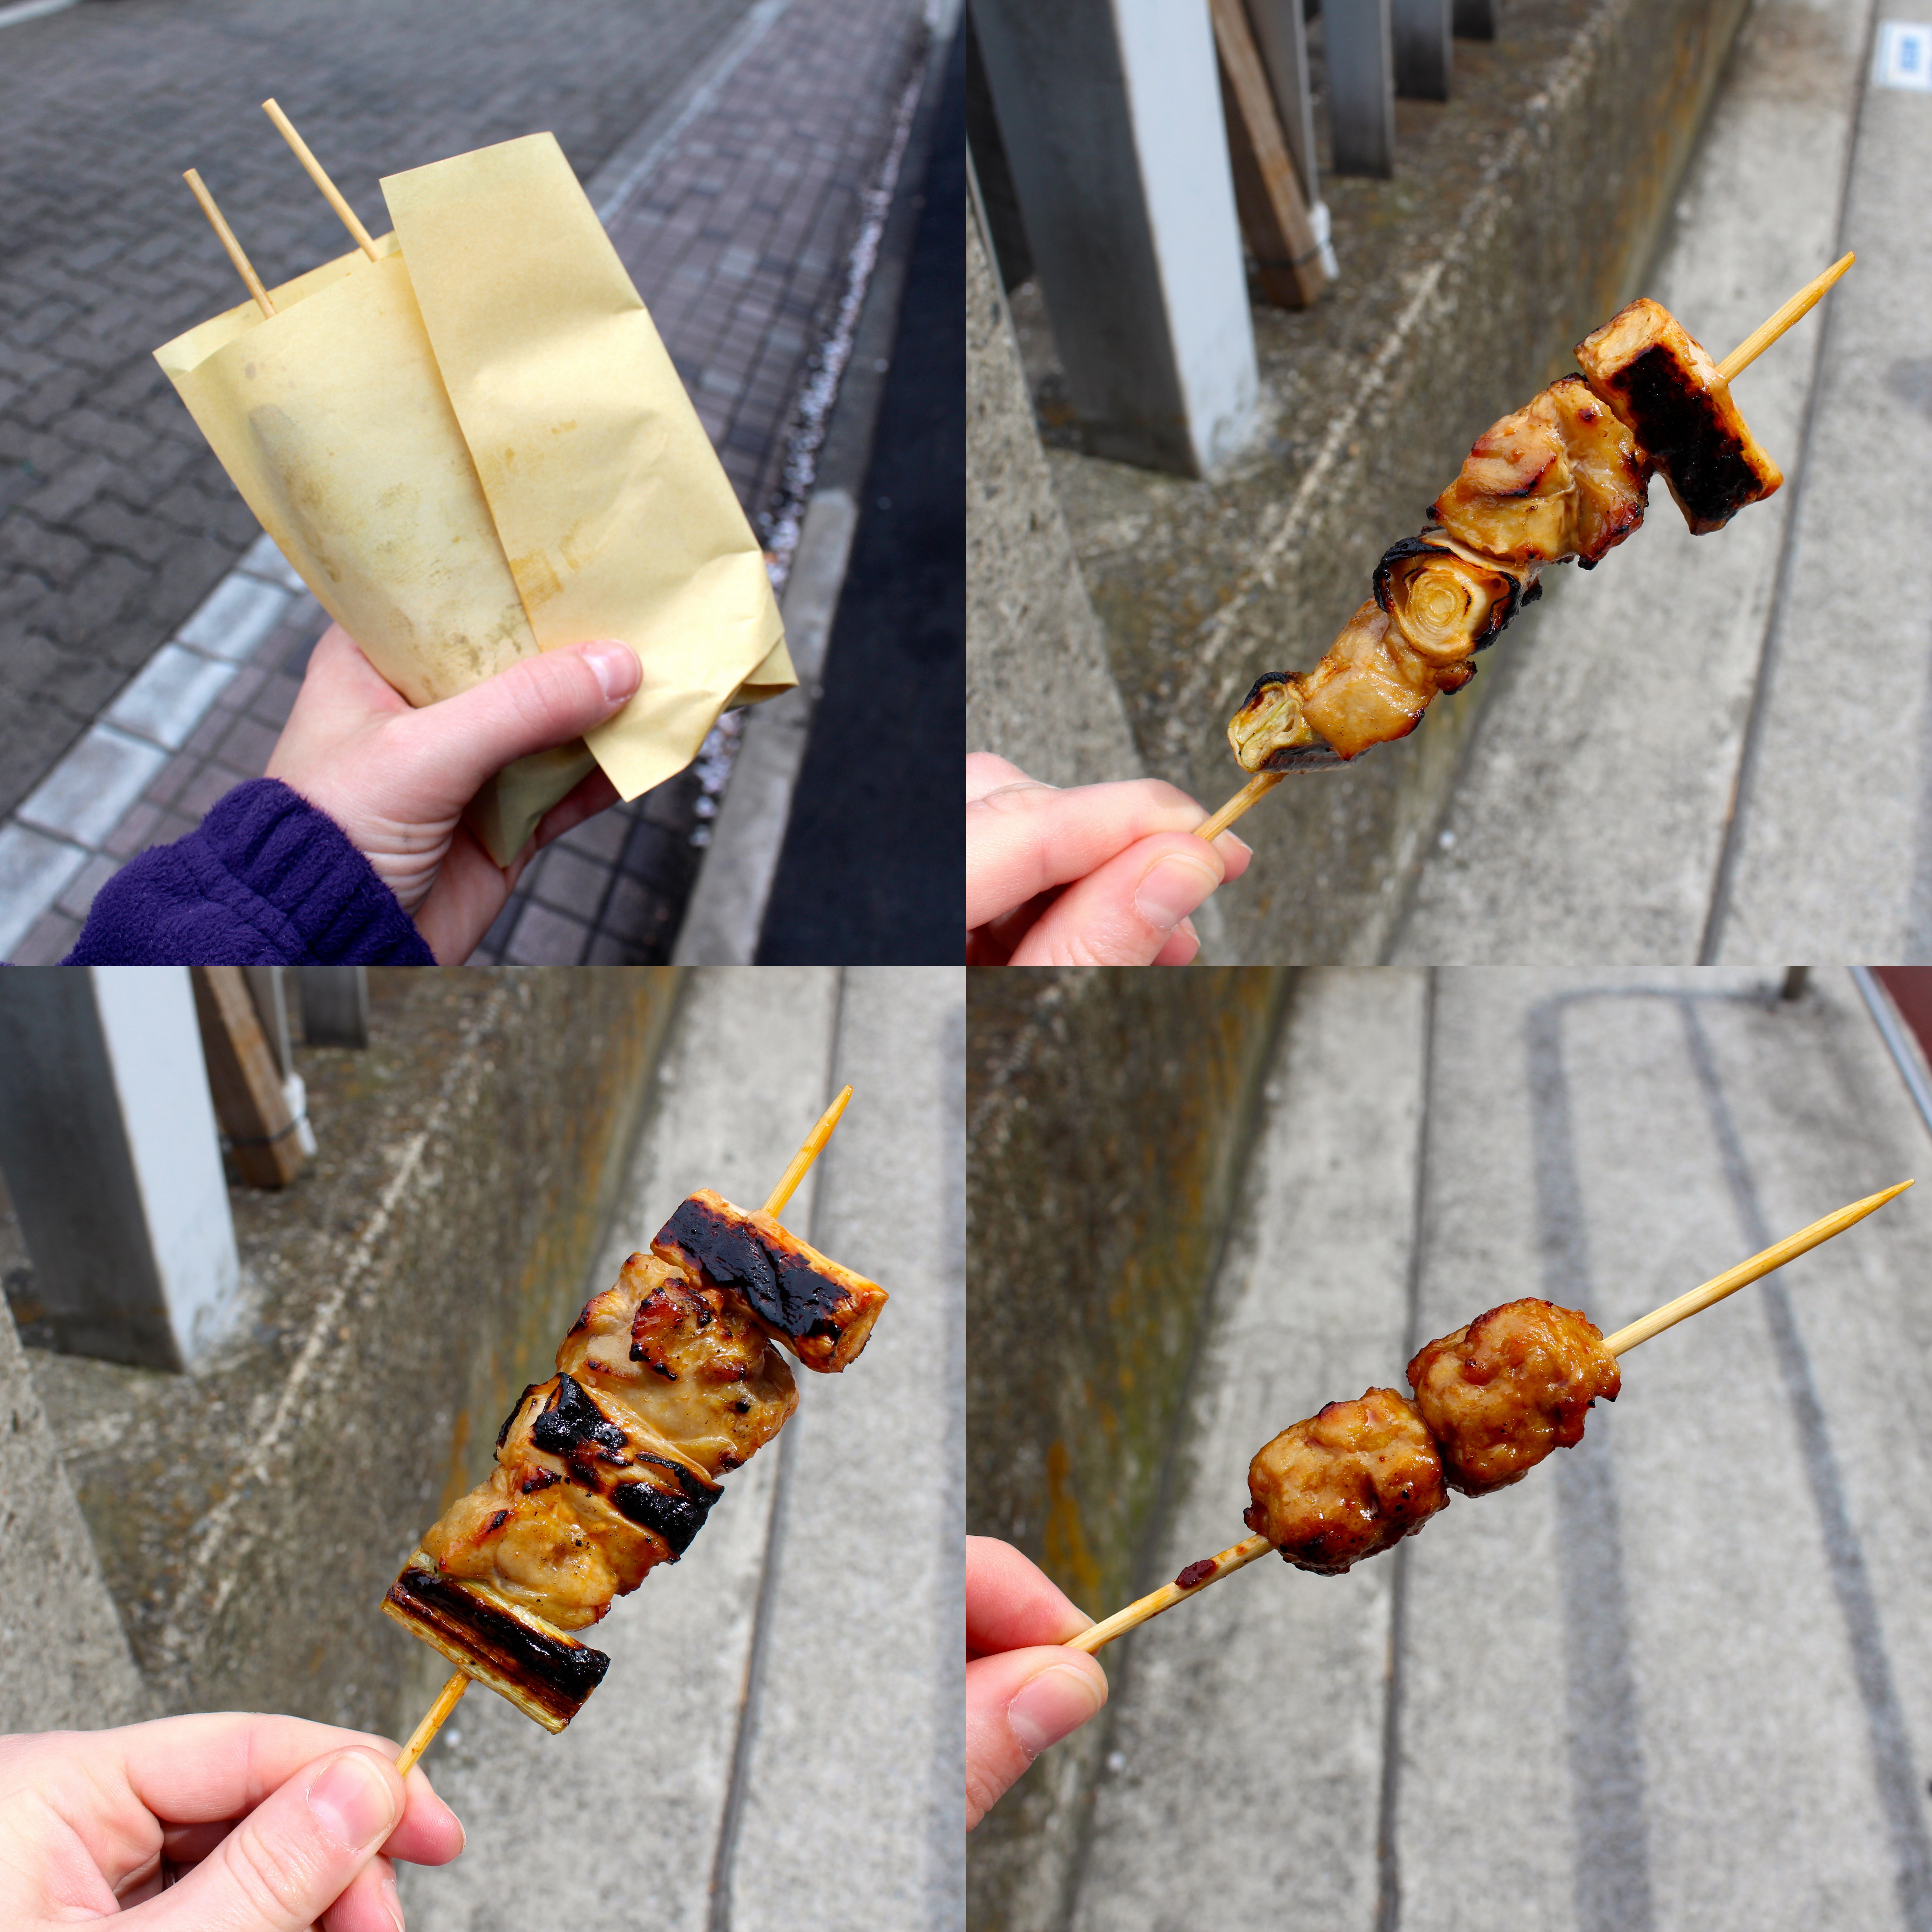 Yakitori are grilled skewers of chicken.  These are chicken thigh pieces with leeks and chicken meatballs.